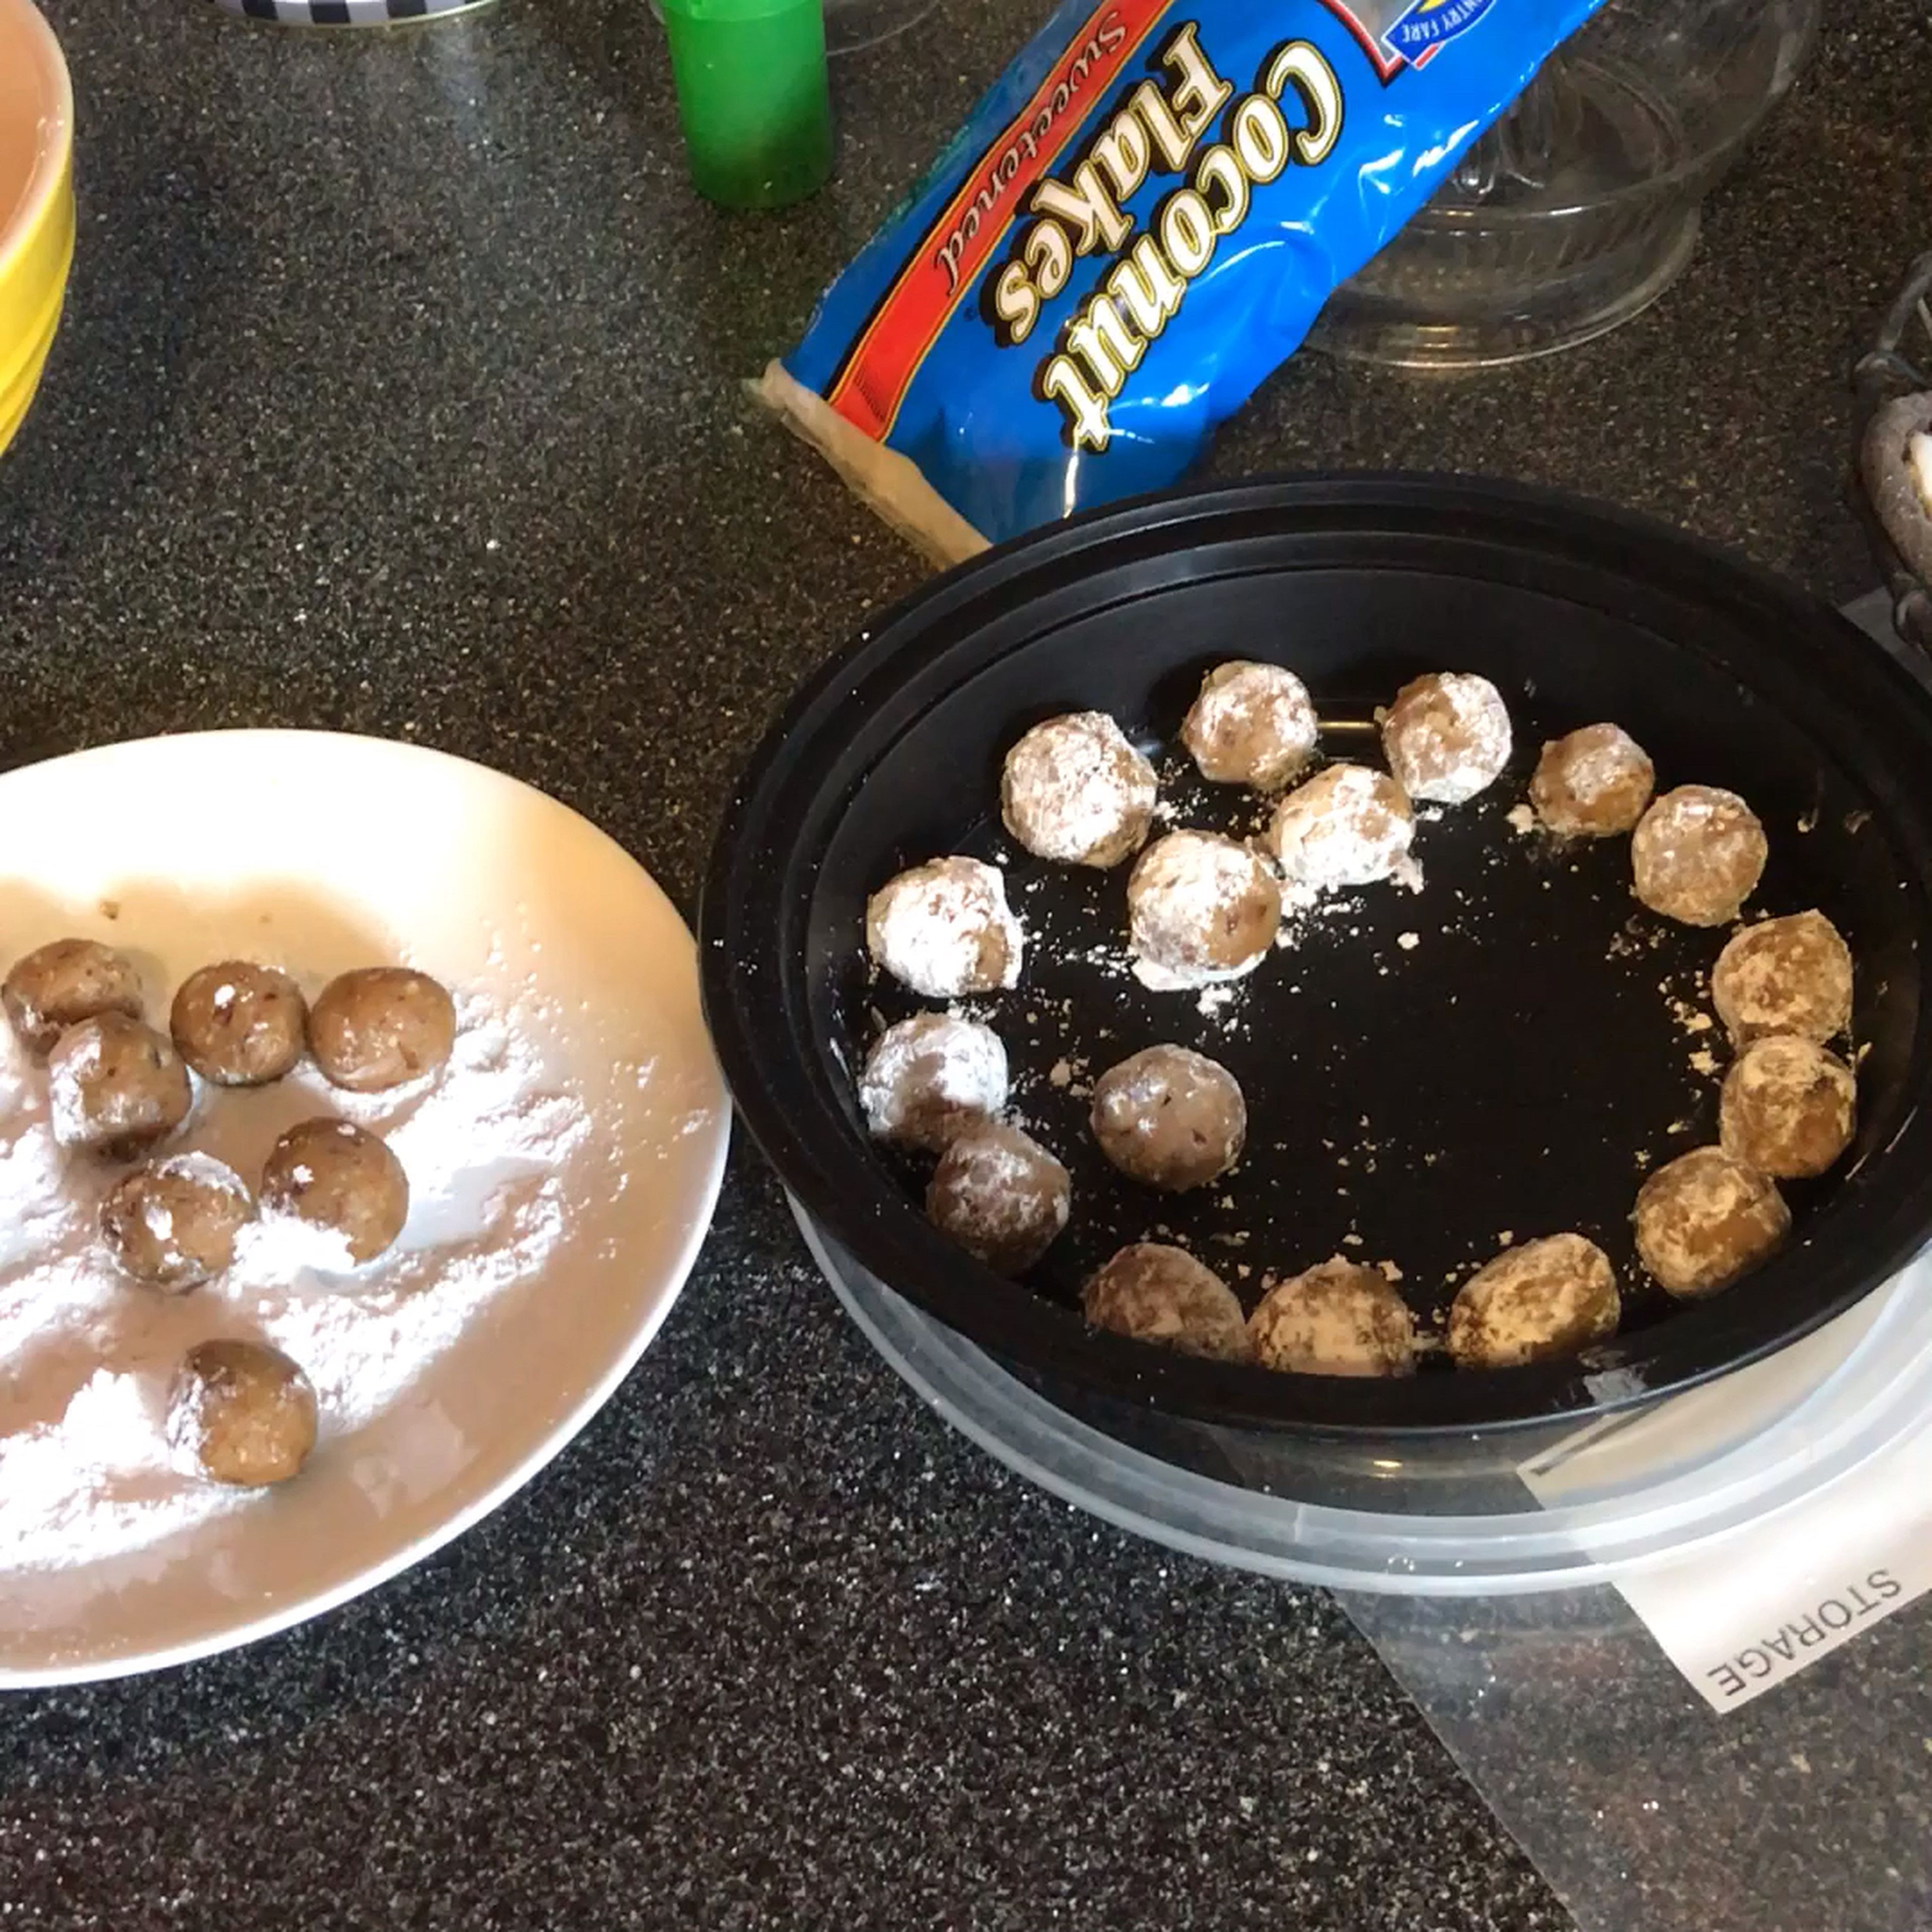 Mold a teaspoon of the mixture into a ball. Roll each ball in powdered sugar